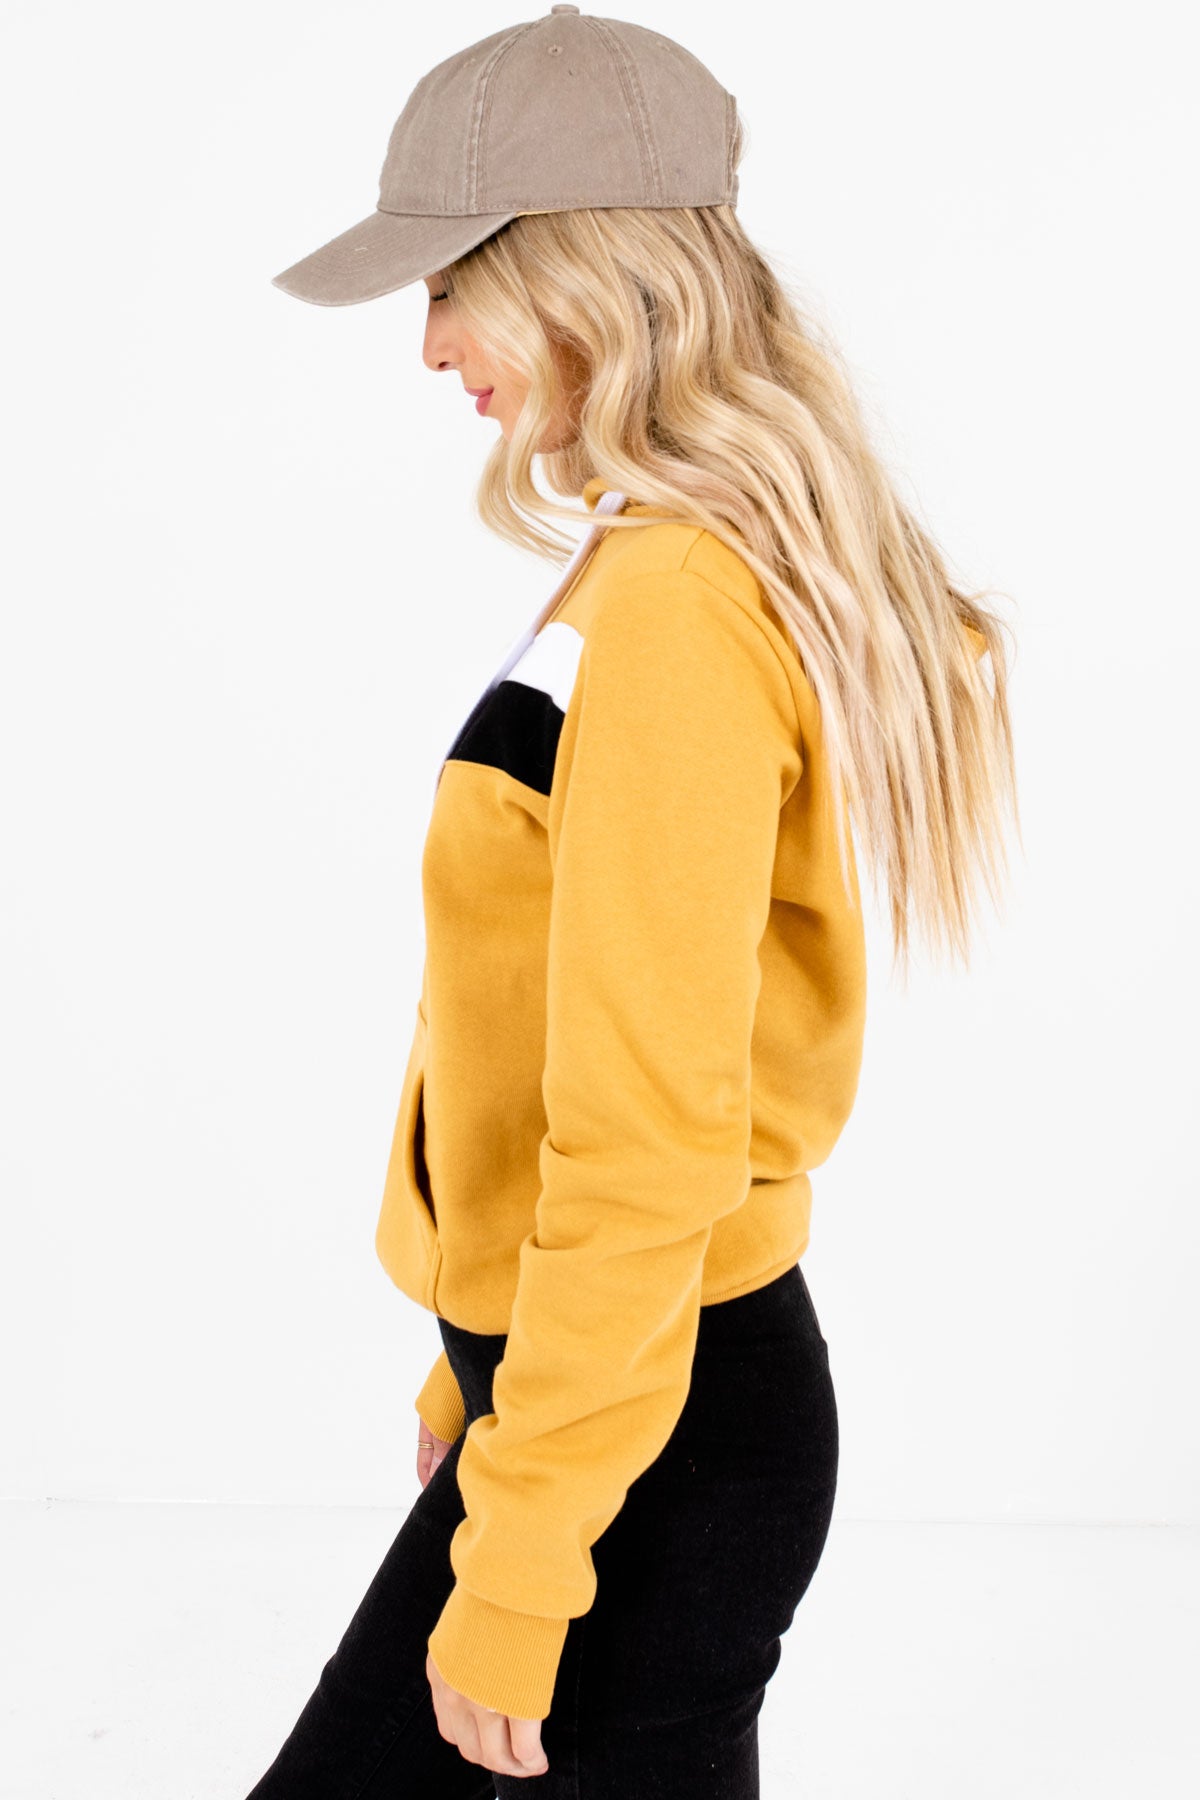 Mustard Yellow Front Pocket Boutique Hoodies for Women